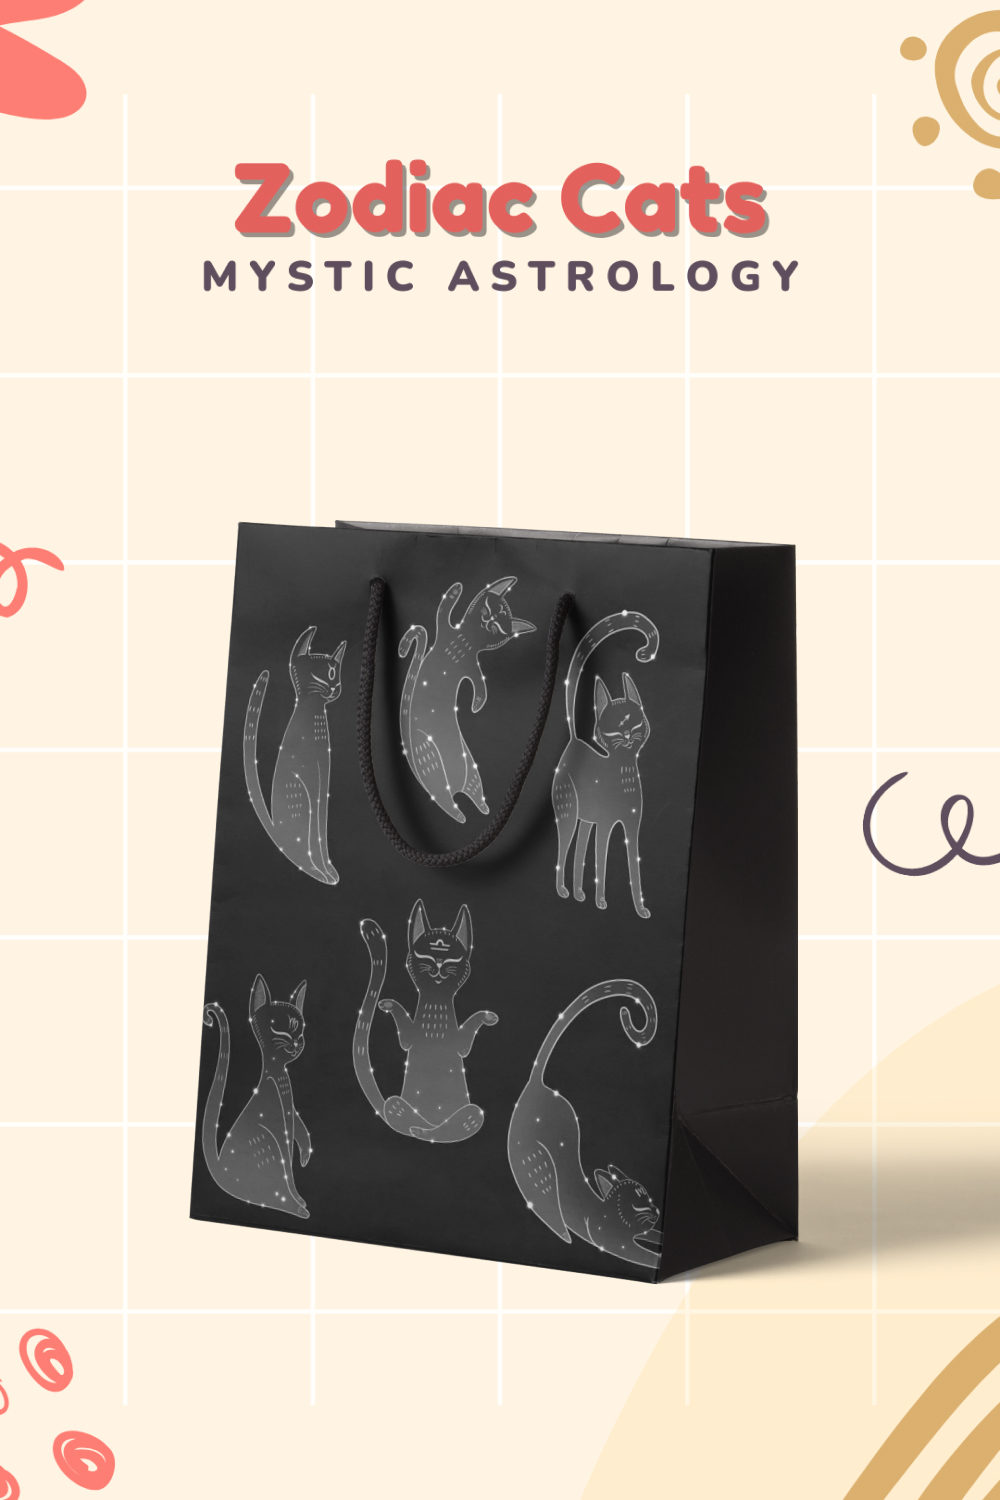 Black bag with cats zodiac sign.